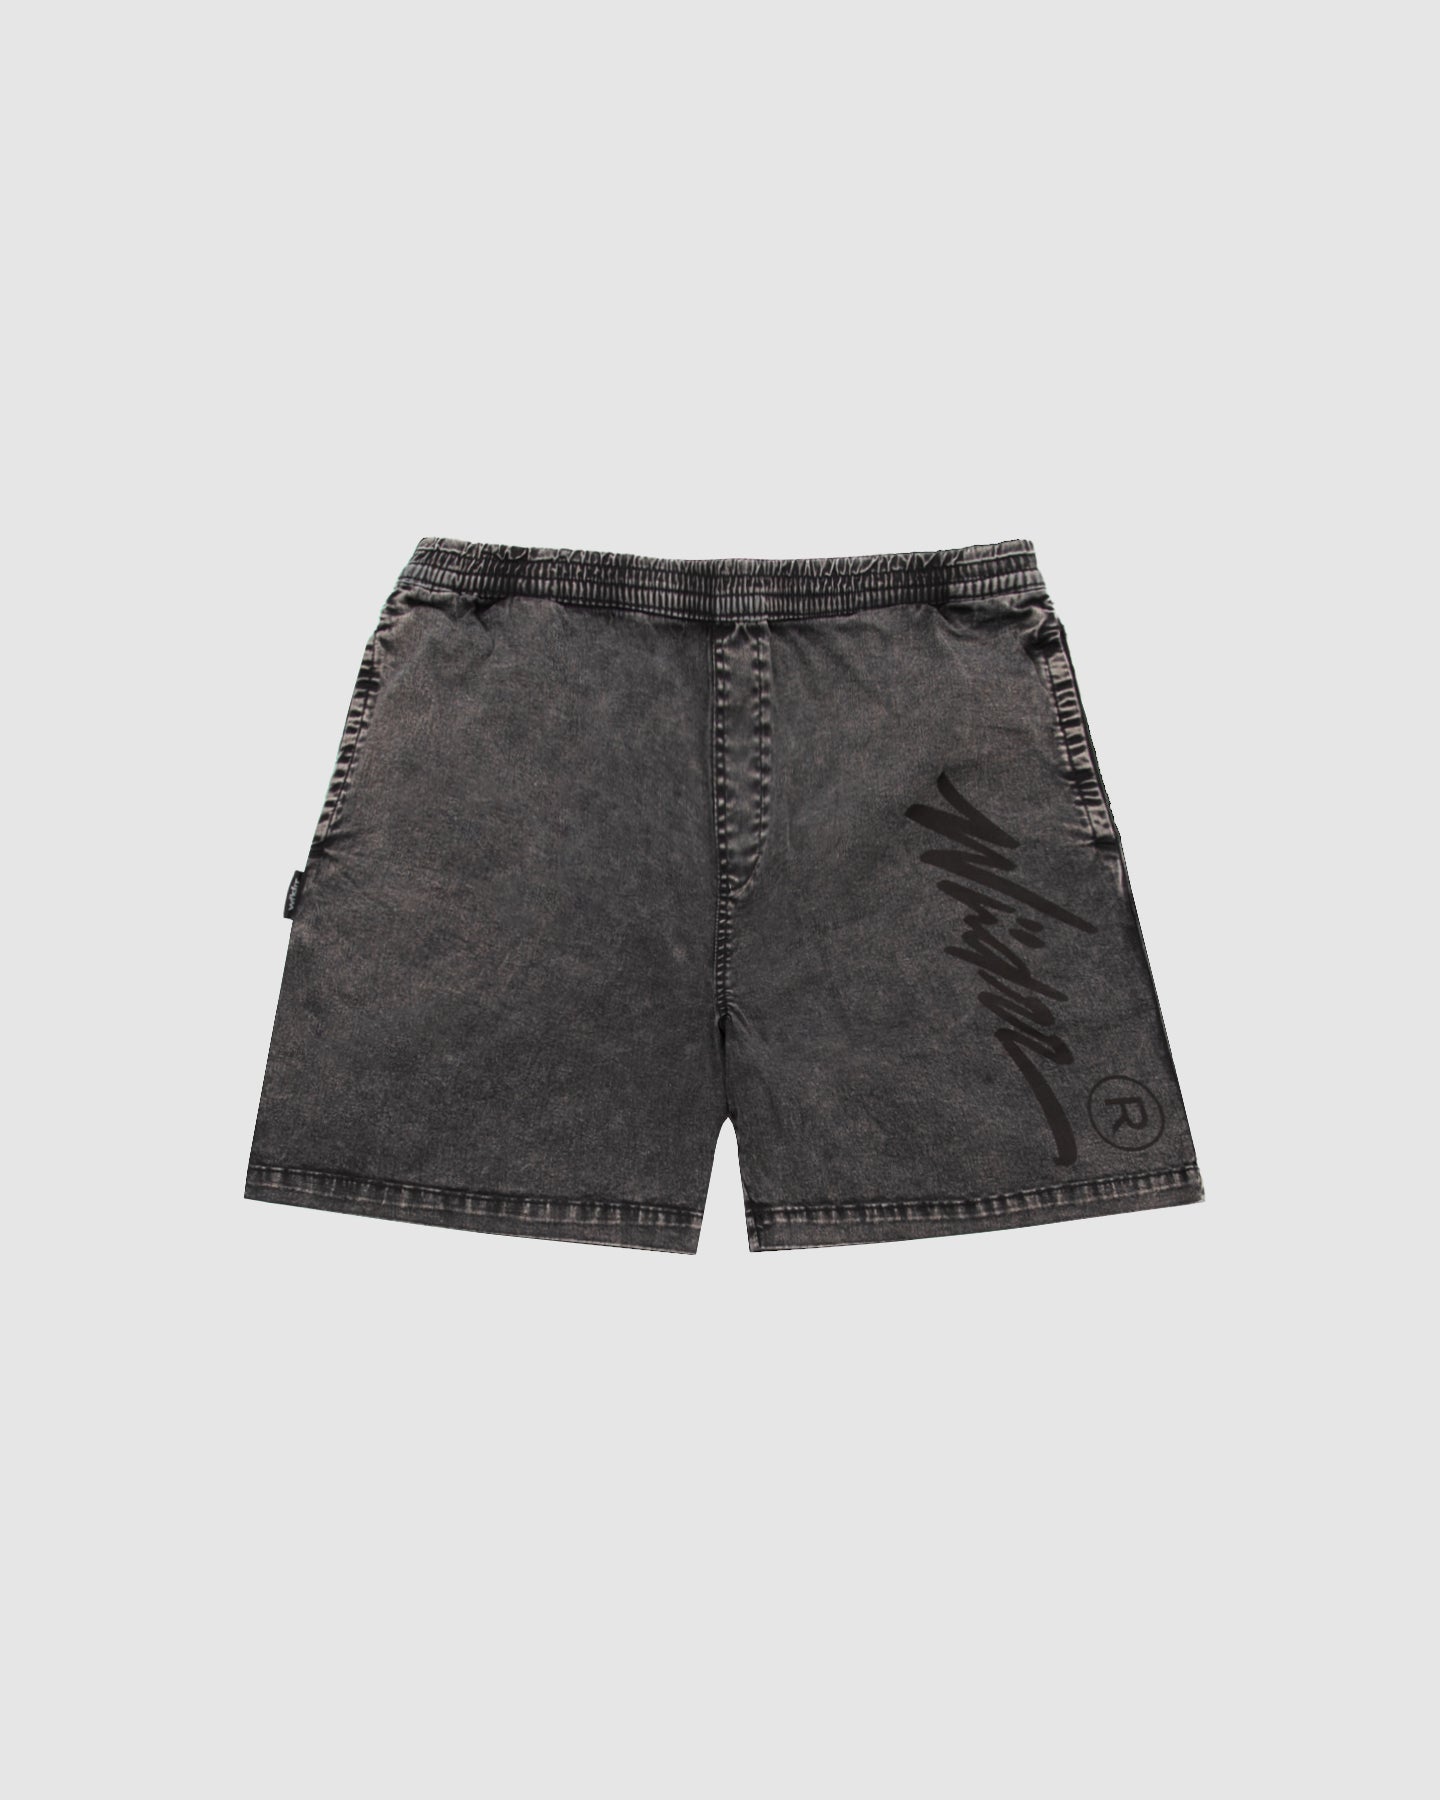 OFFEND BEACH SHORT - WASHED BLACK